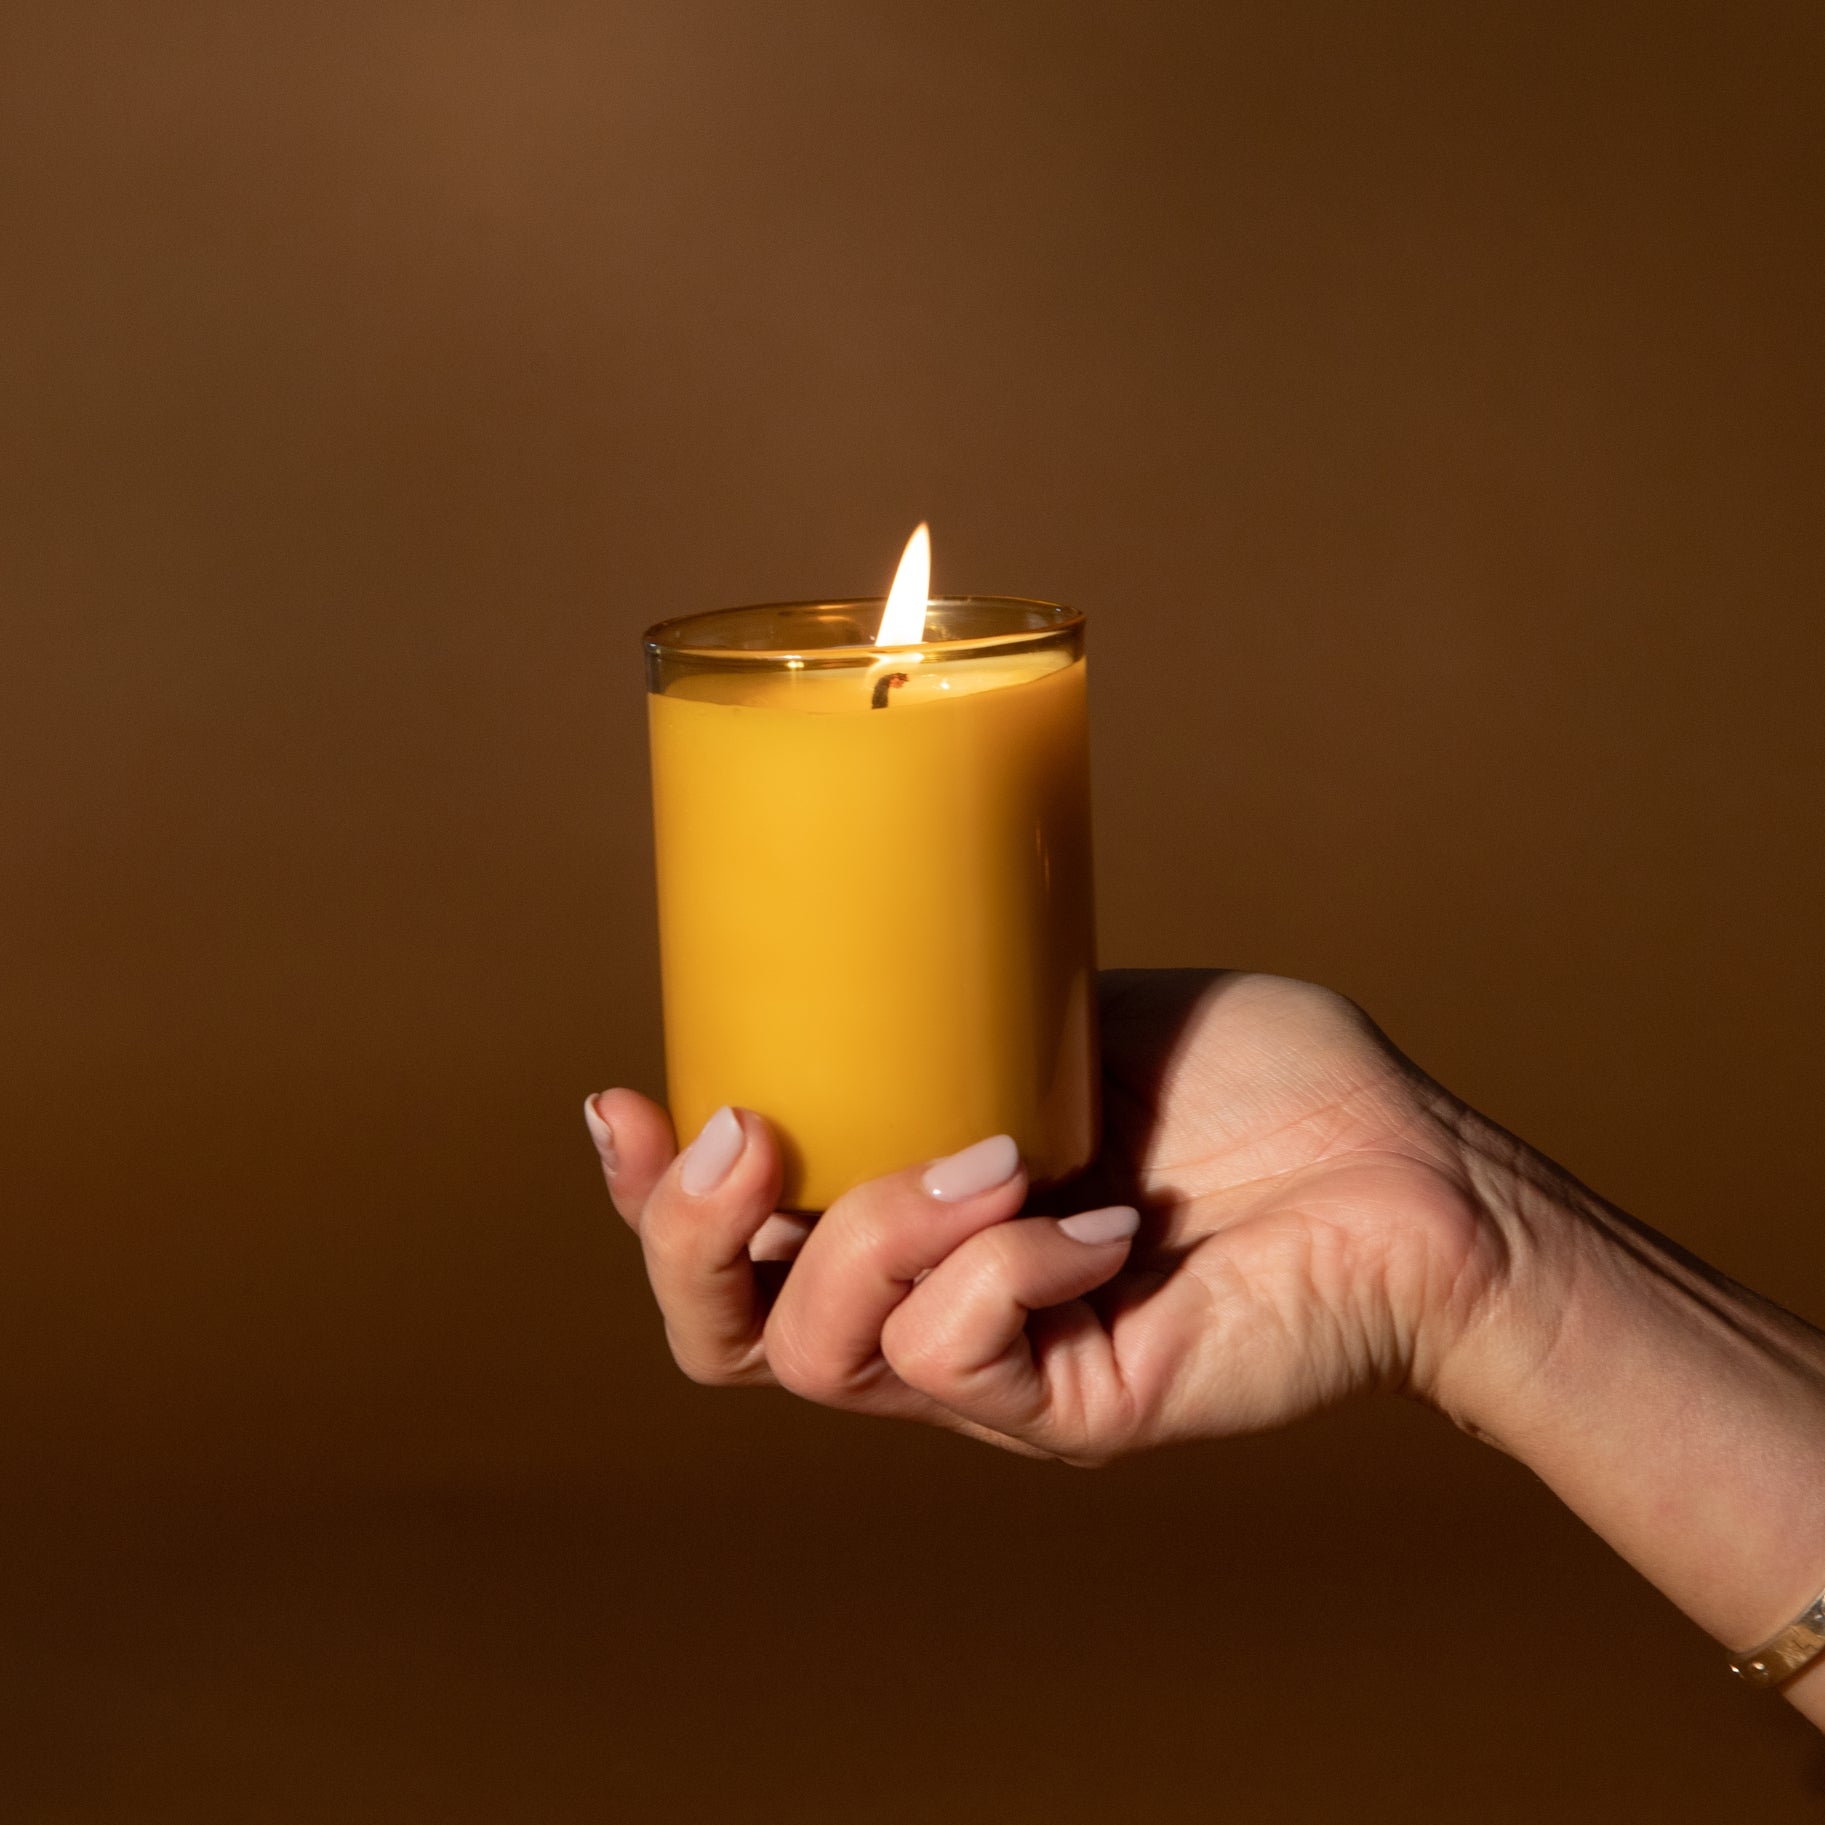 The Beekeeper Glass Candle